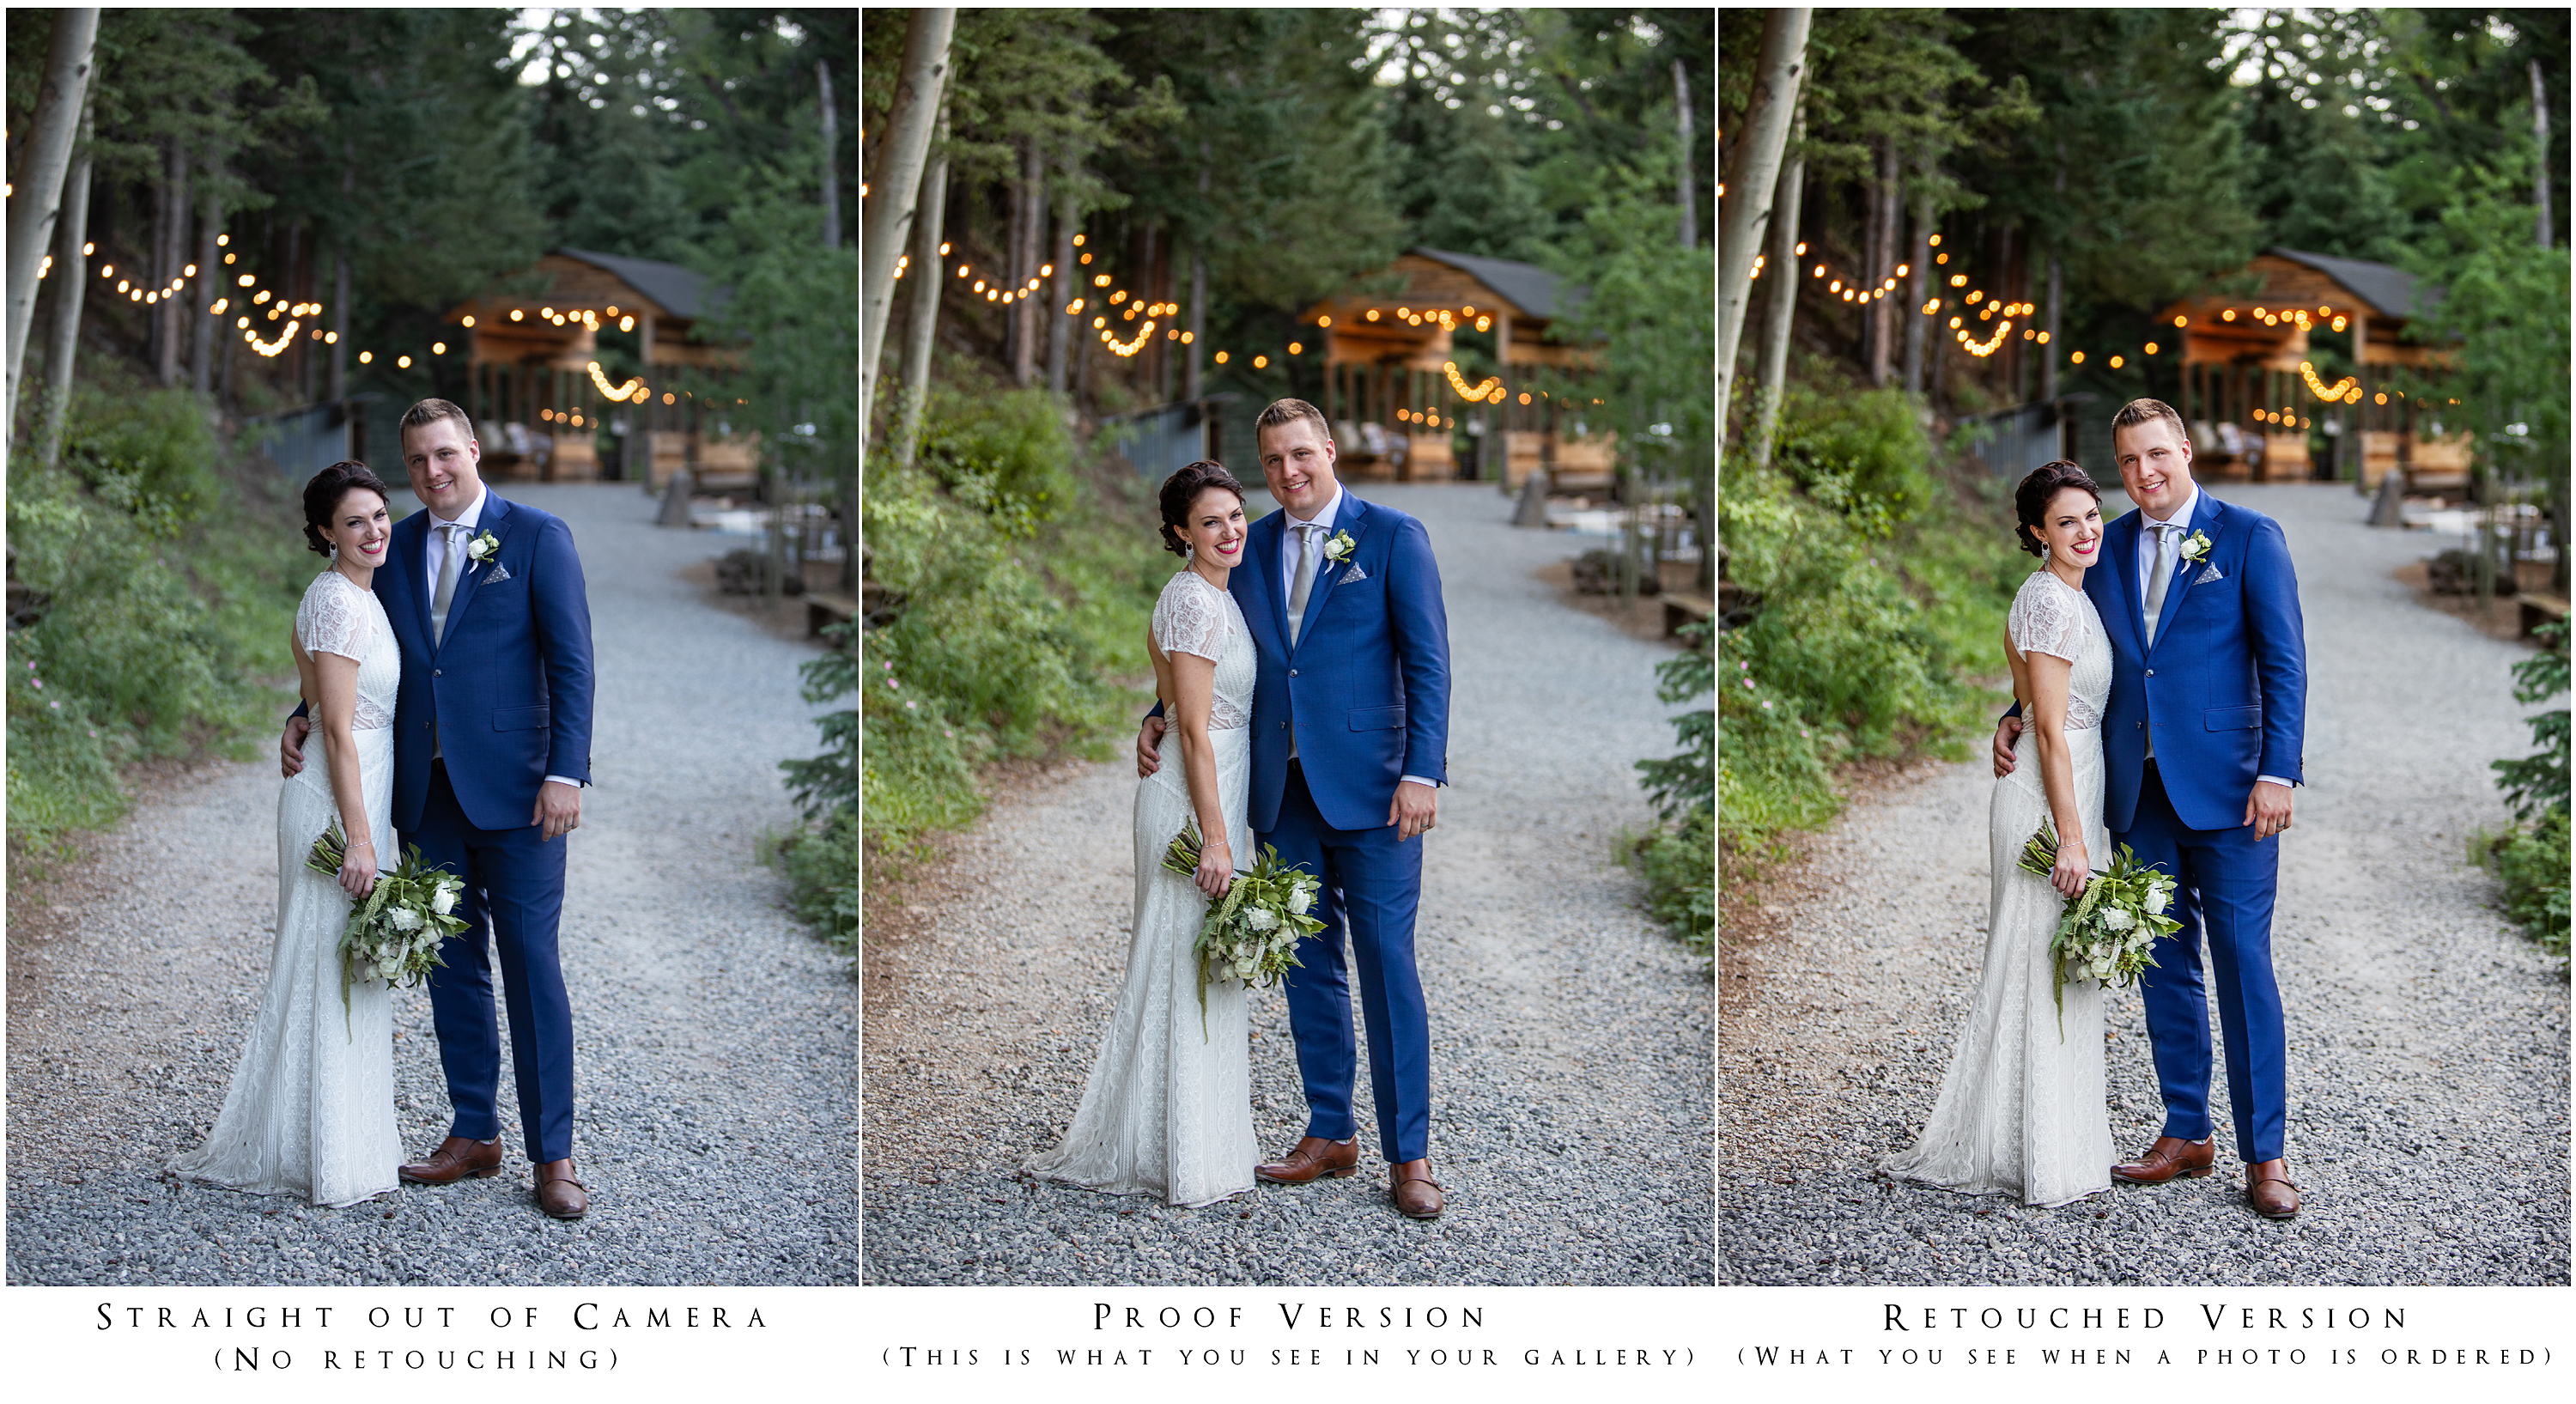 Example of retouching for wedding photo in Colorado in advice guide with top 5 questions to ask wedding photographers